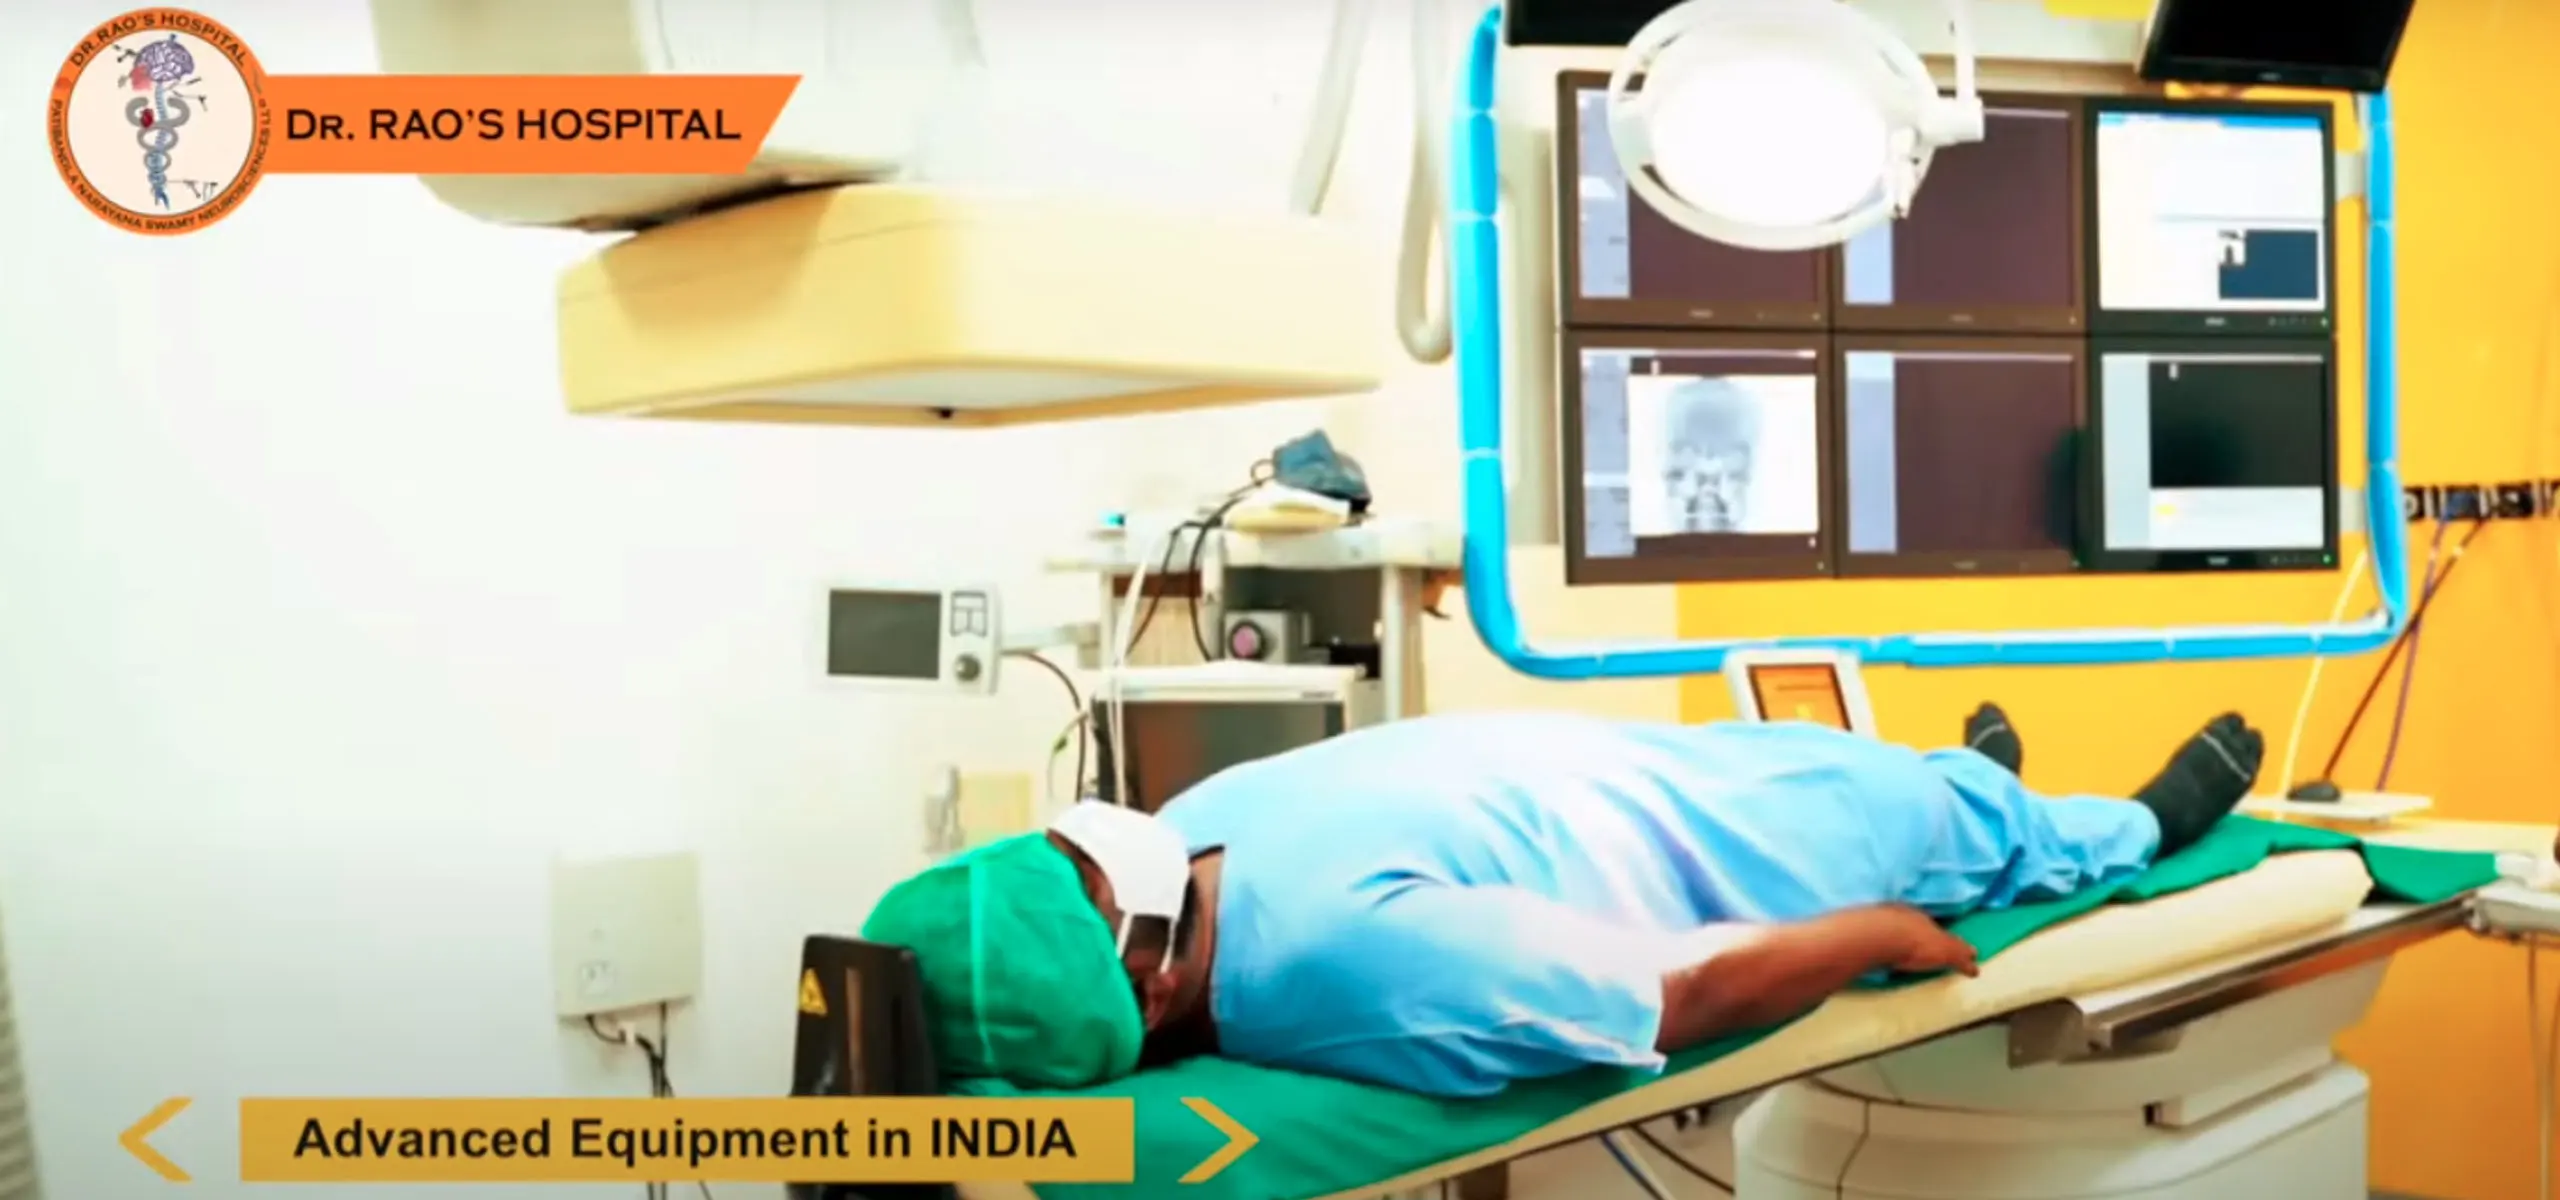 Dr Rao's Hospital - Role of an Experienced Neurosurgical Team by Dr Rao at Dr Rao's Hospital.